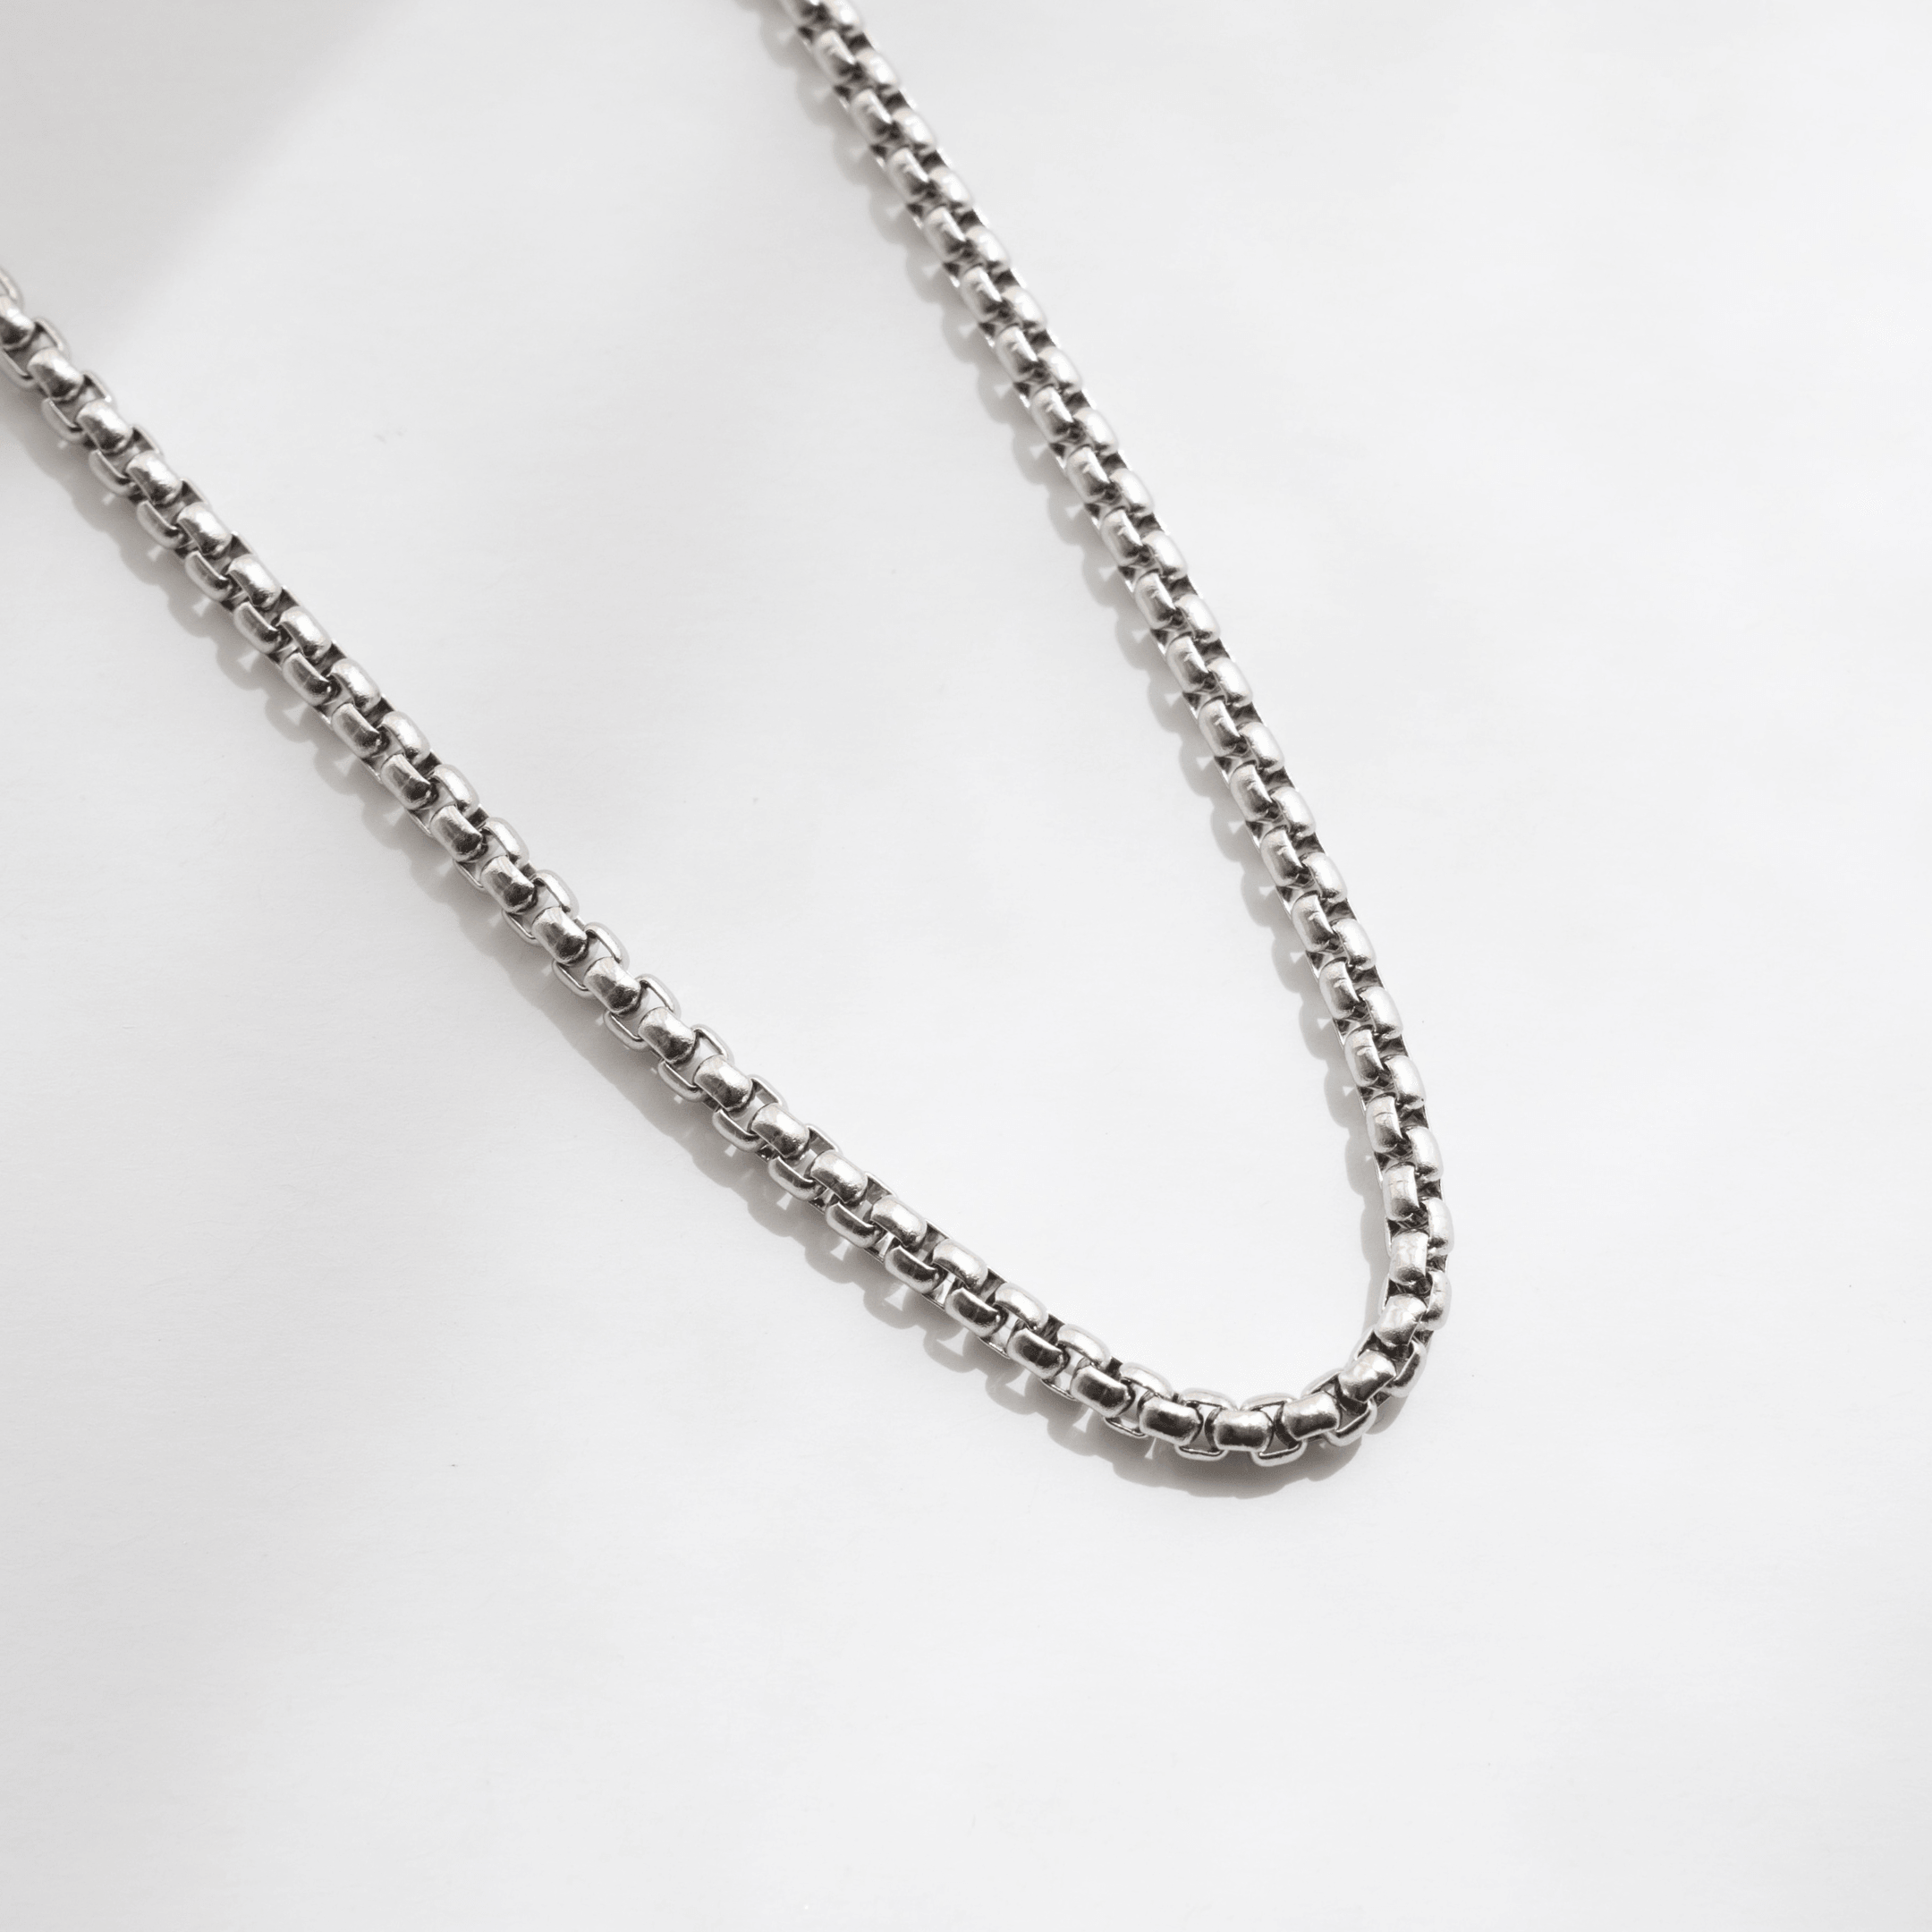 Essential Chain Necklace - Silver - mens, mens necklace, Silver, stainless steel, unisex - La Musa Jewellery